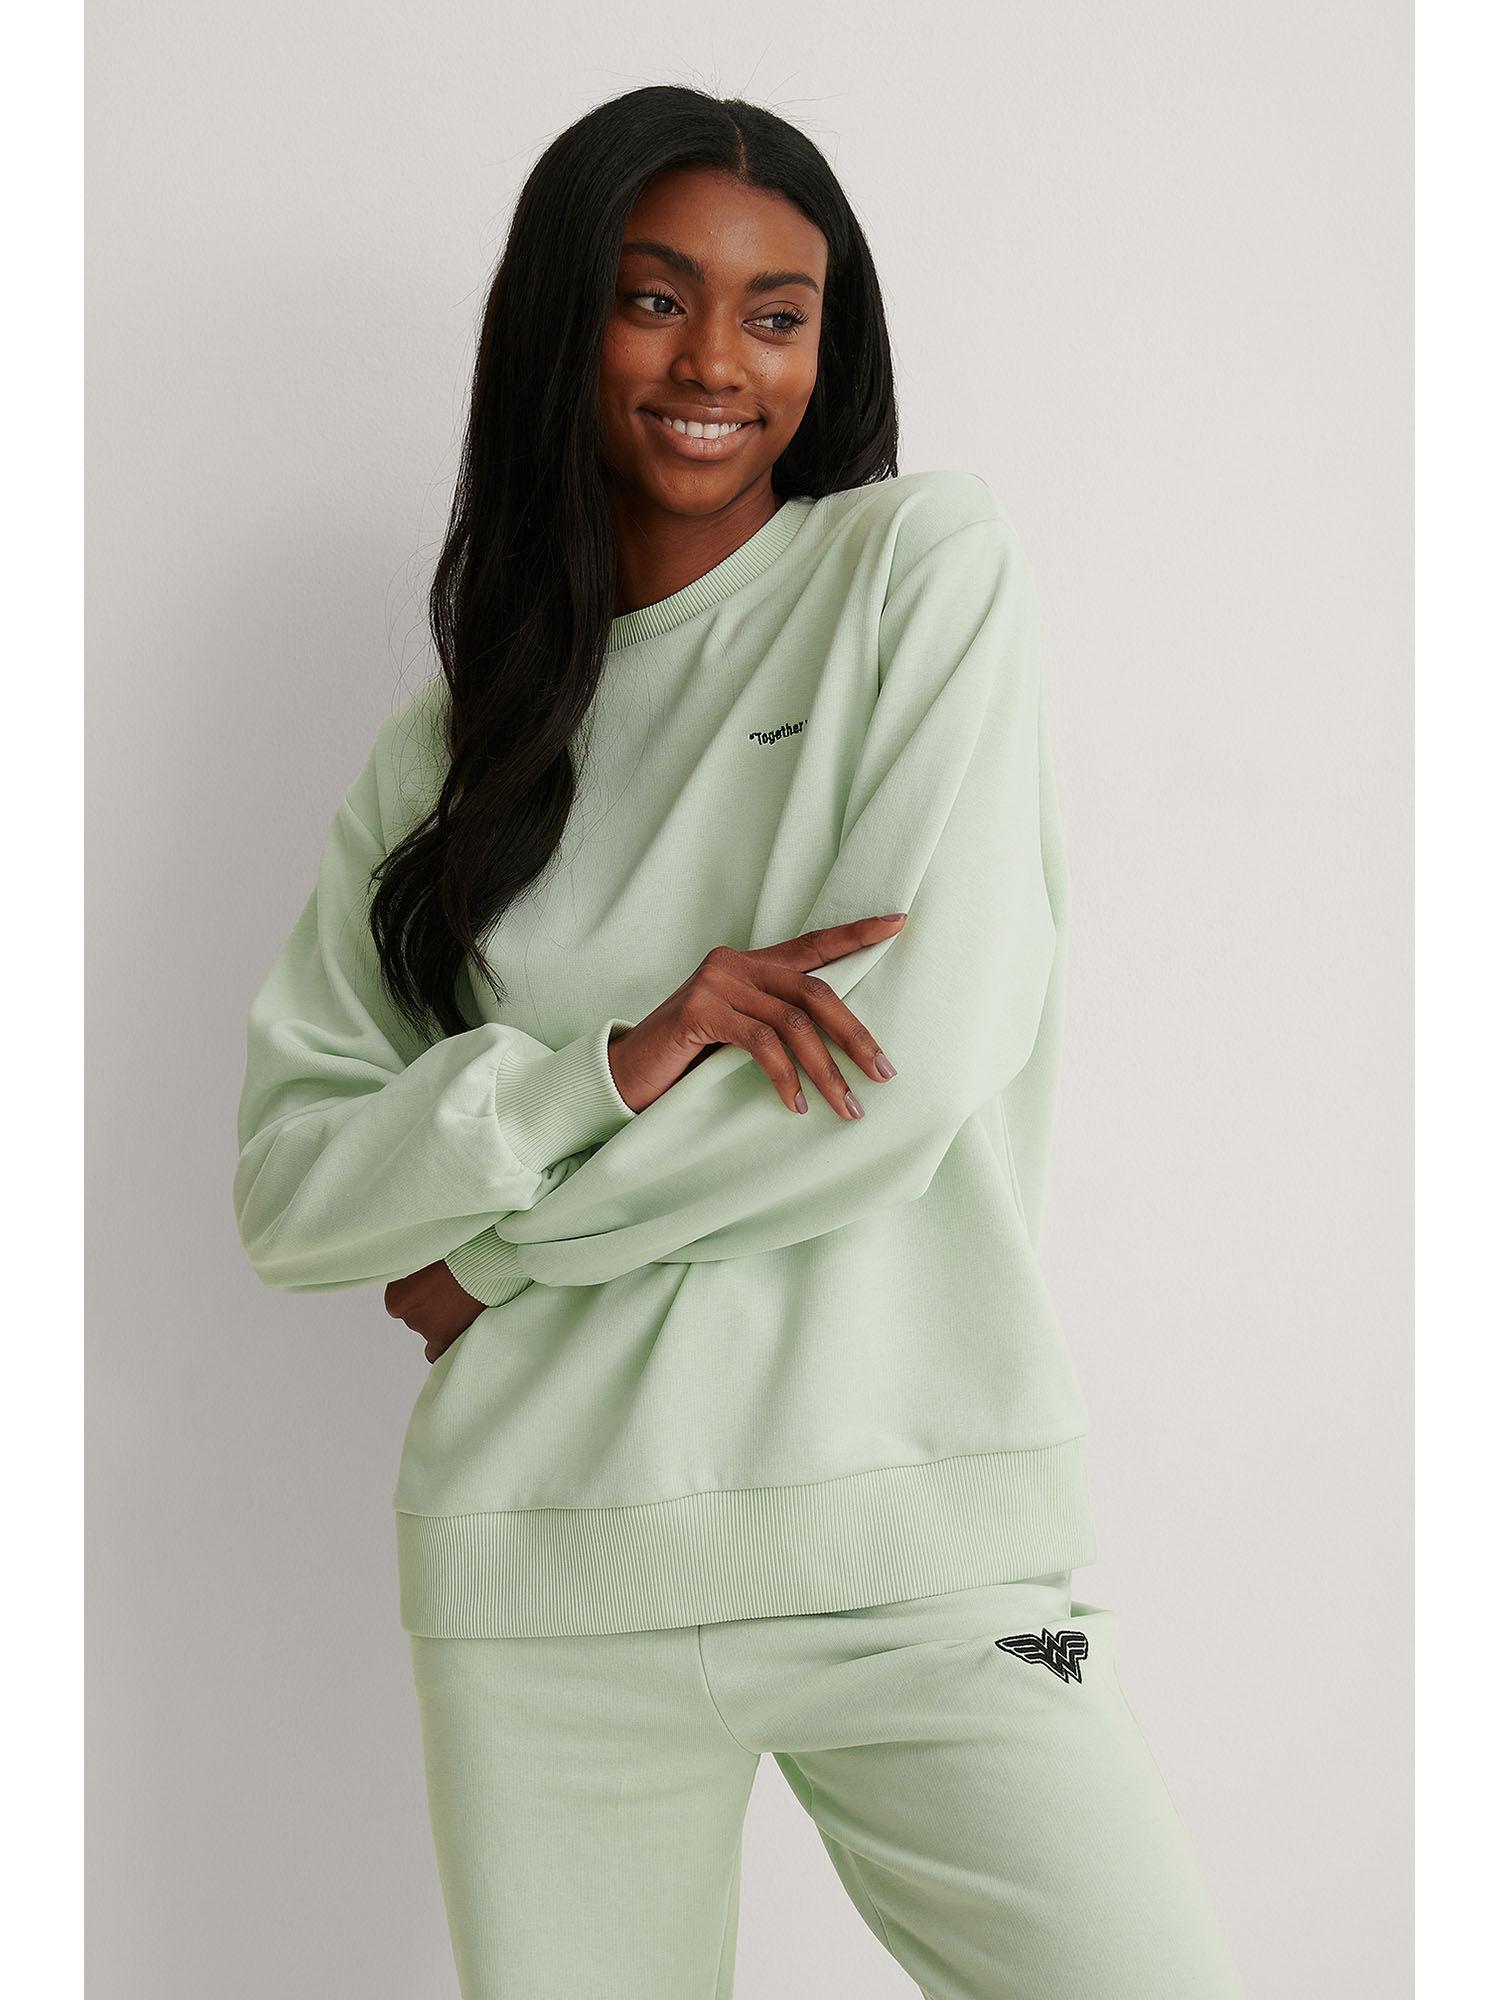 wonder woman oversized sweater-light green quotes